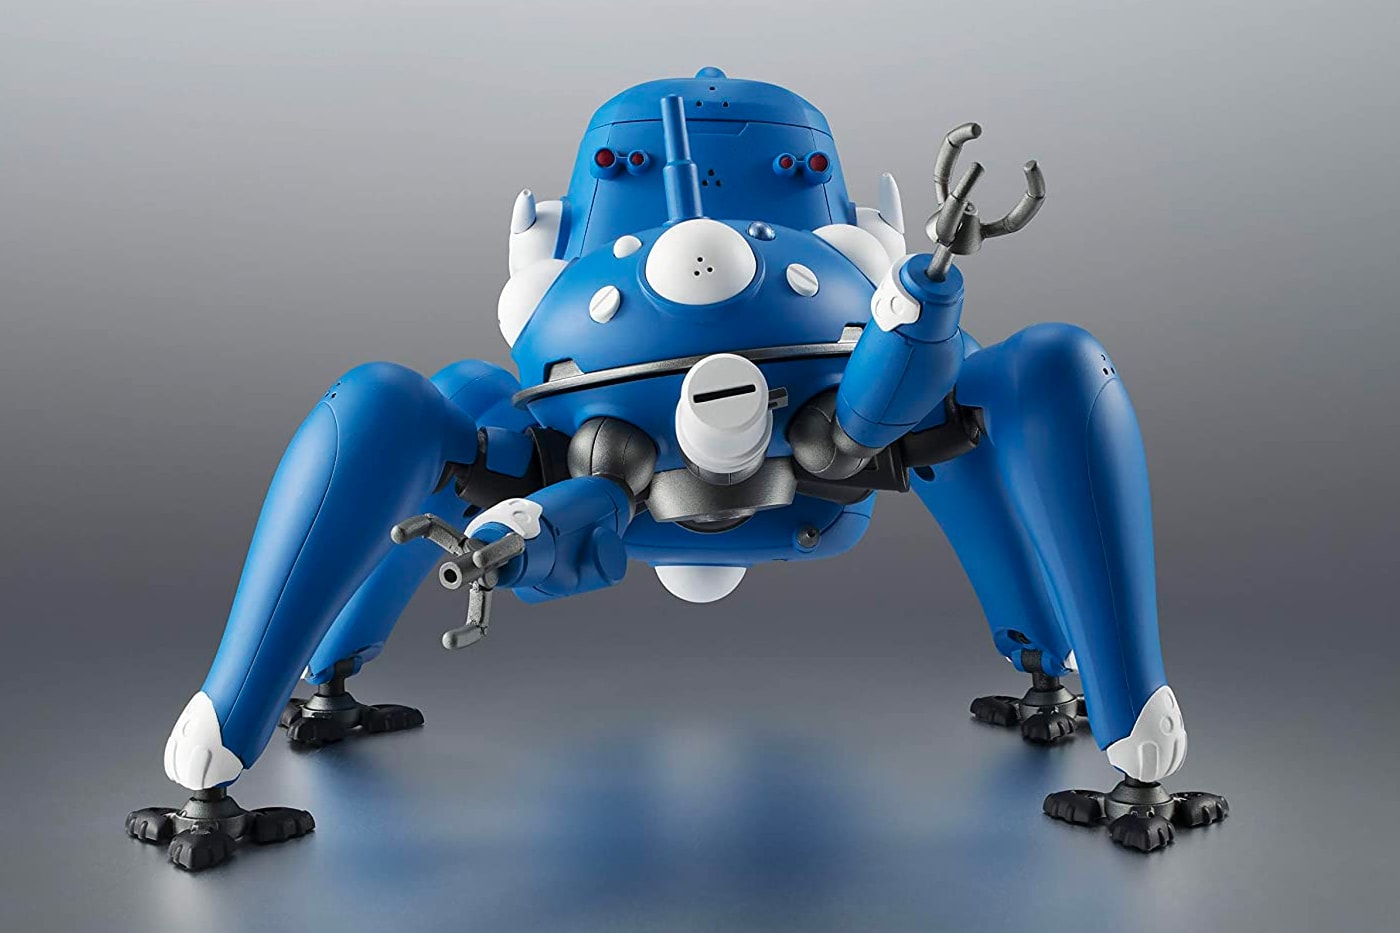 Bandai Spirits ROBOT Tamashii Attack Shell Mobile Squad Ghost in the Shell S.A.C. 2nd GIG & SAC_2045 Figure release